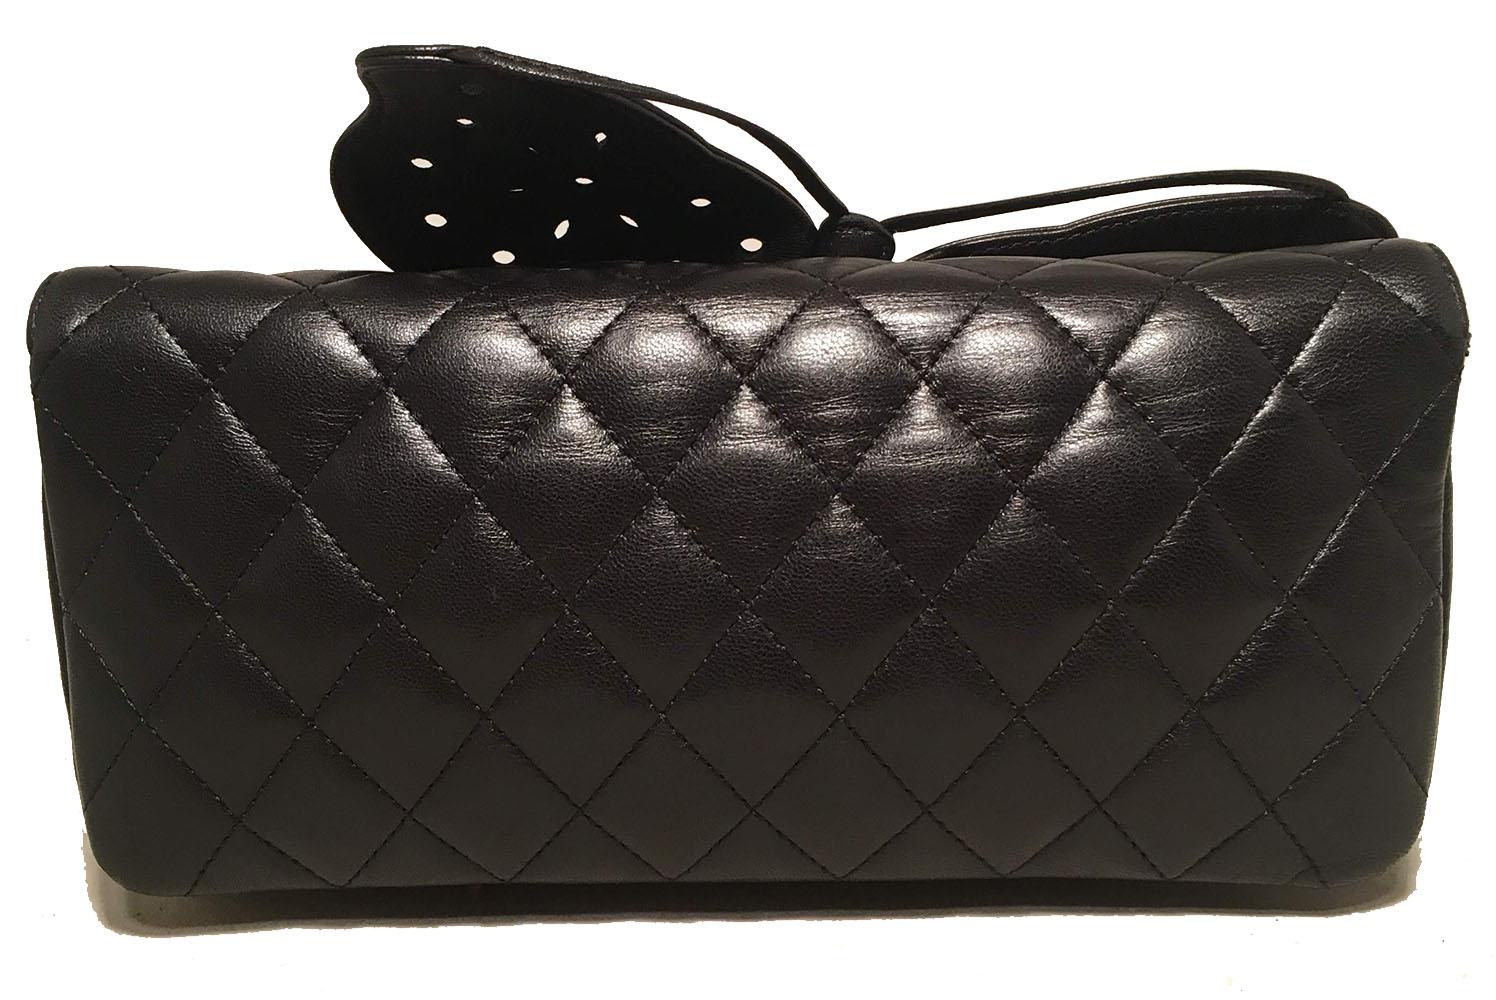 ADORABLE Chanel Quilted Black Leather Butterfly Classic Flap Shoulder Bag in excellent condition. Signature diamond quilted black lambskin leather exterior trimmed with silver hardware and a unique leather laser cut butterfly along the front flap.